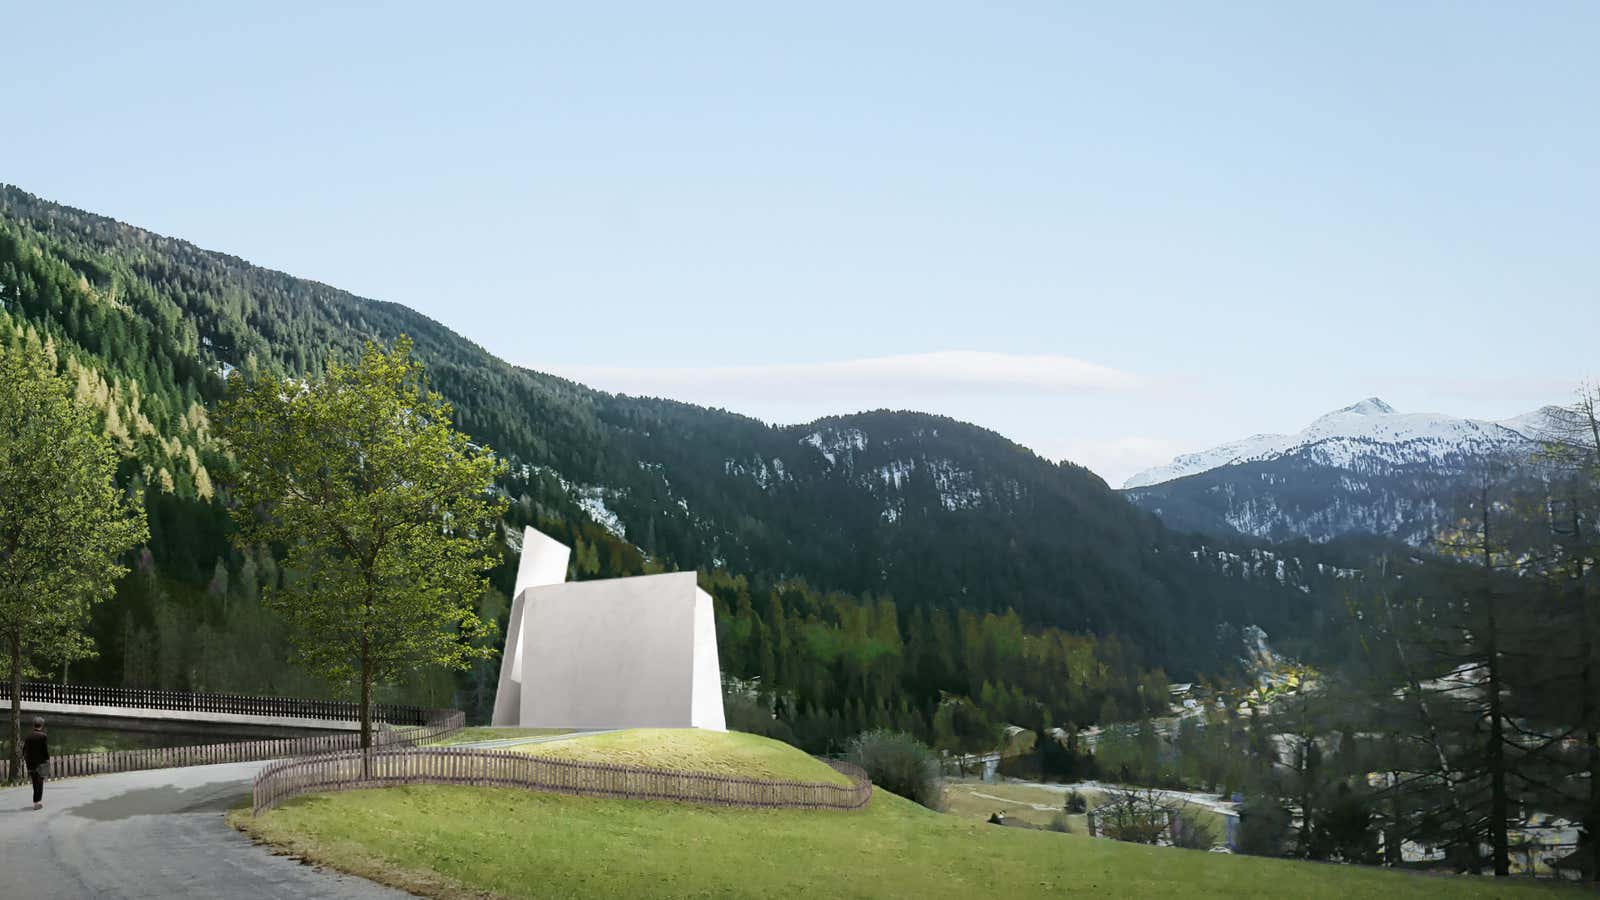 Switzerland’s upcoming “autobahnkirche” will be open to all faiths.